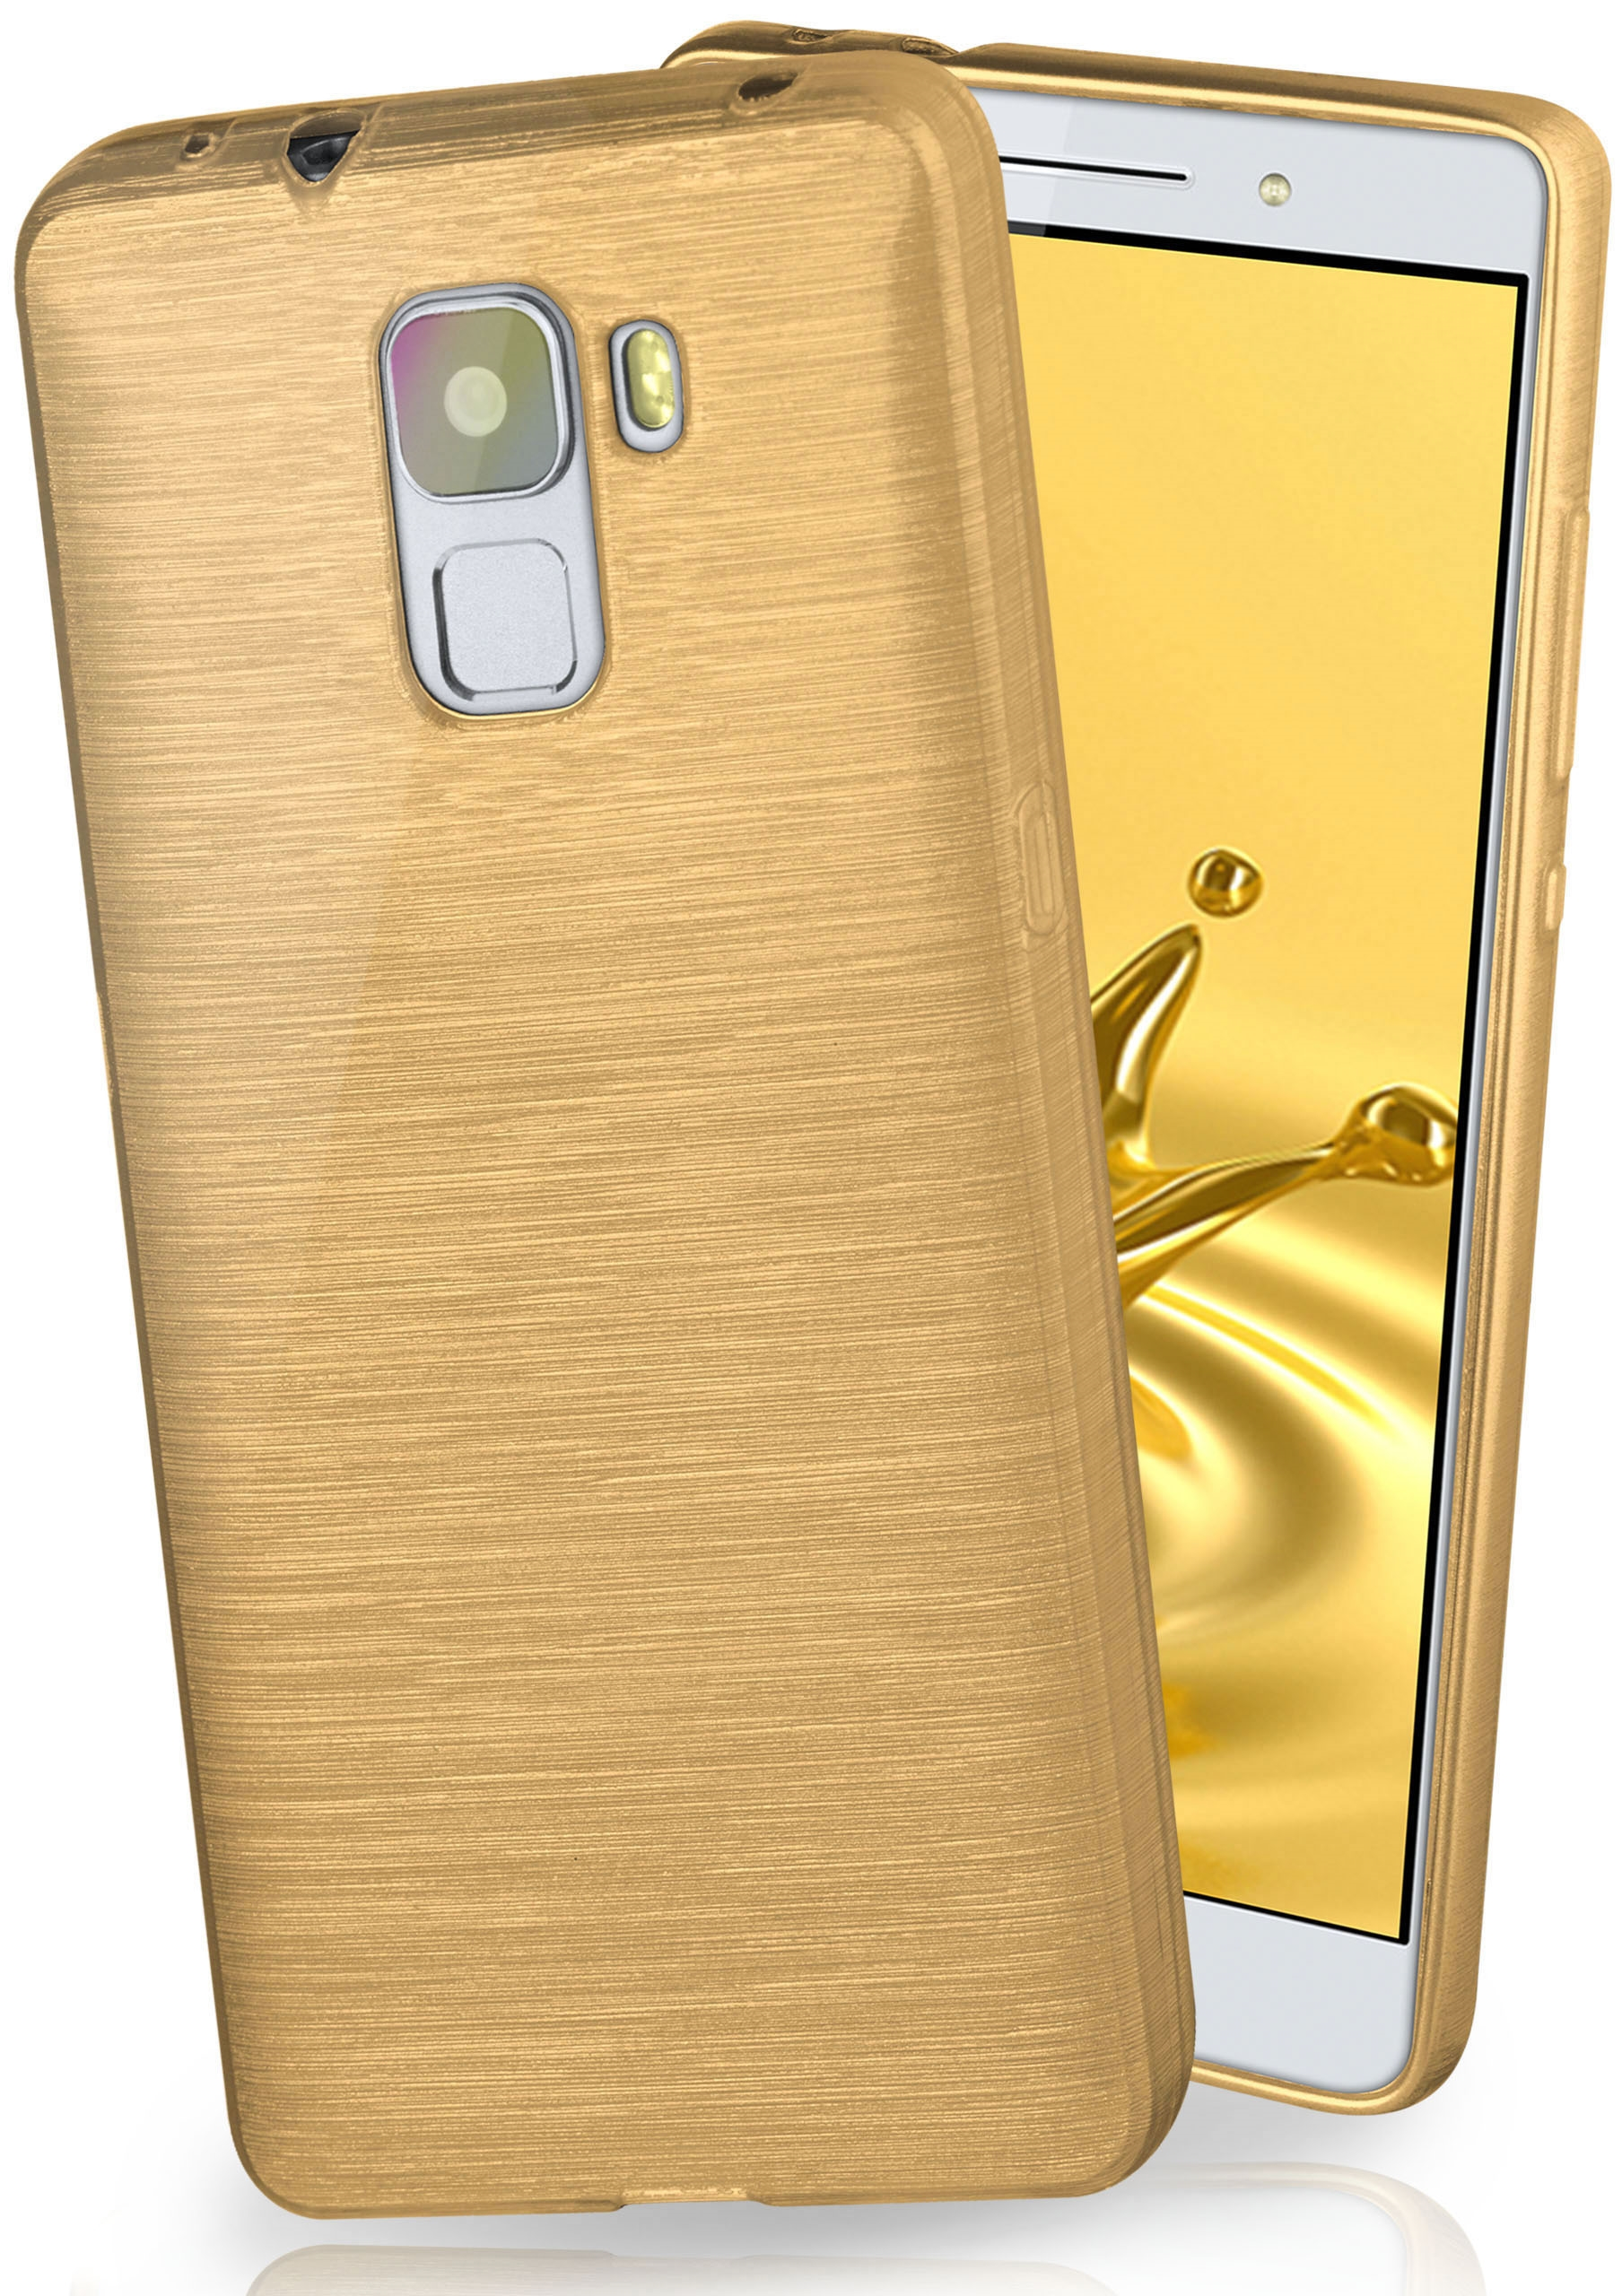 MOEX Brushed / 7 Backcover, Case, Honor Huawei, Ivory-Gold 7 Premium